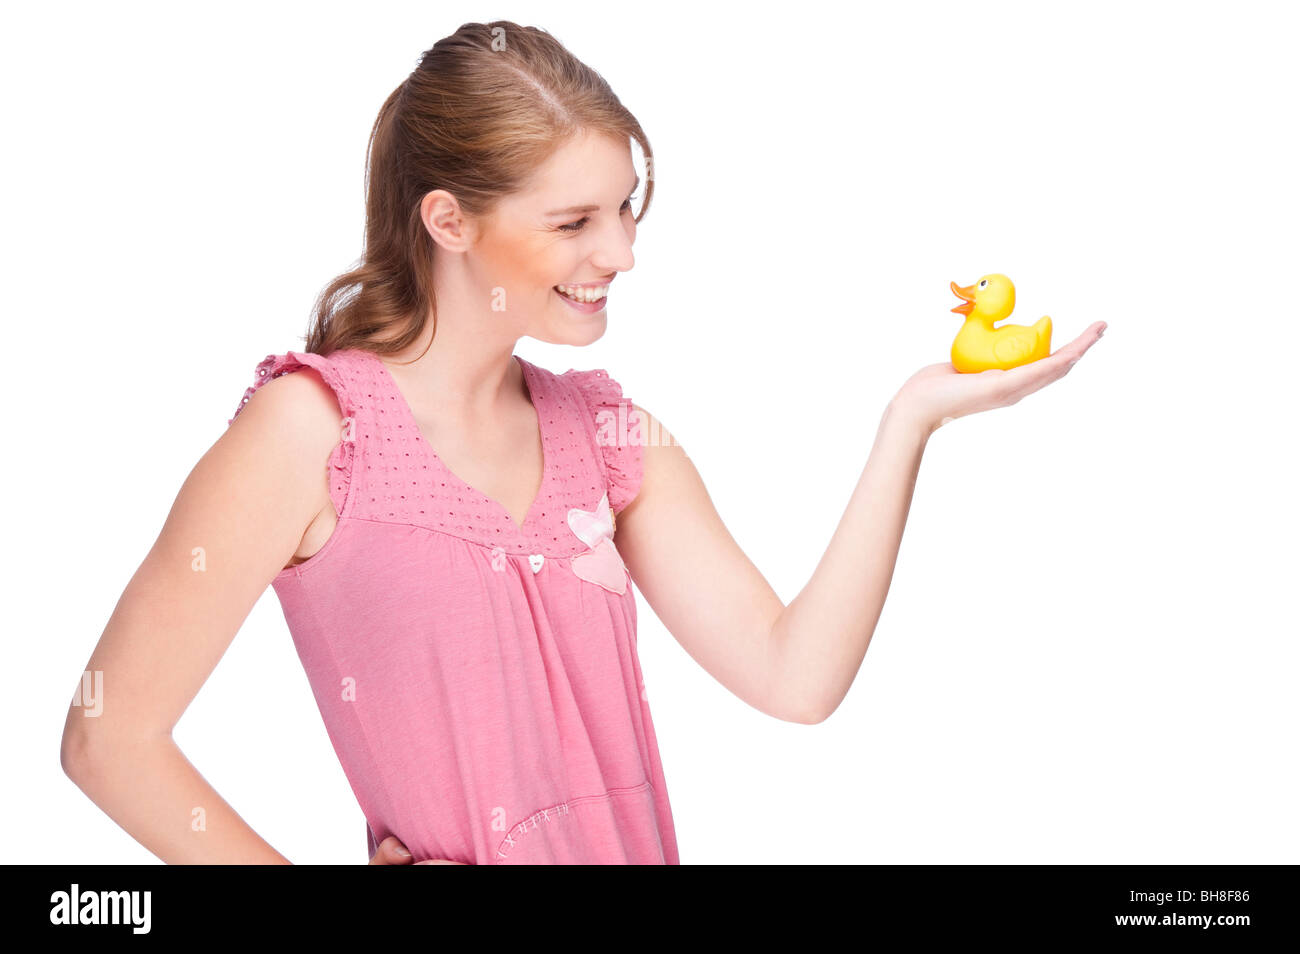 Full isolated studio picture from a young woman with yellow rubber duck Stock Photo